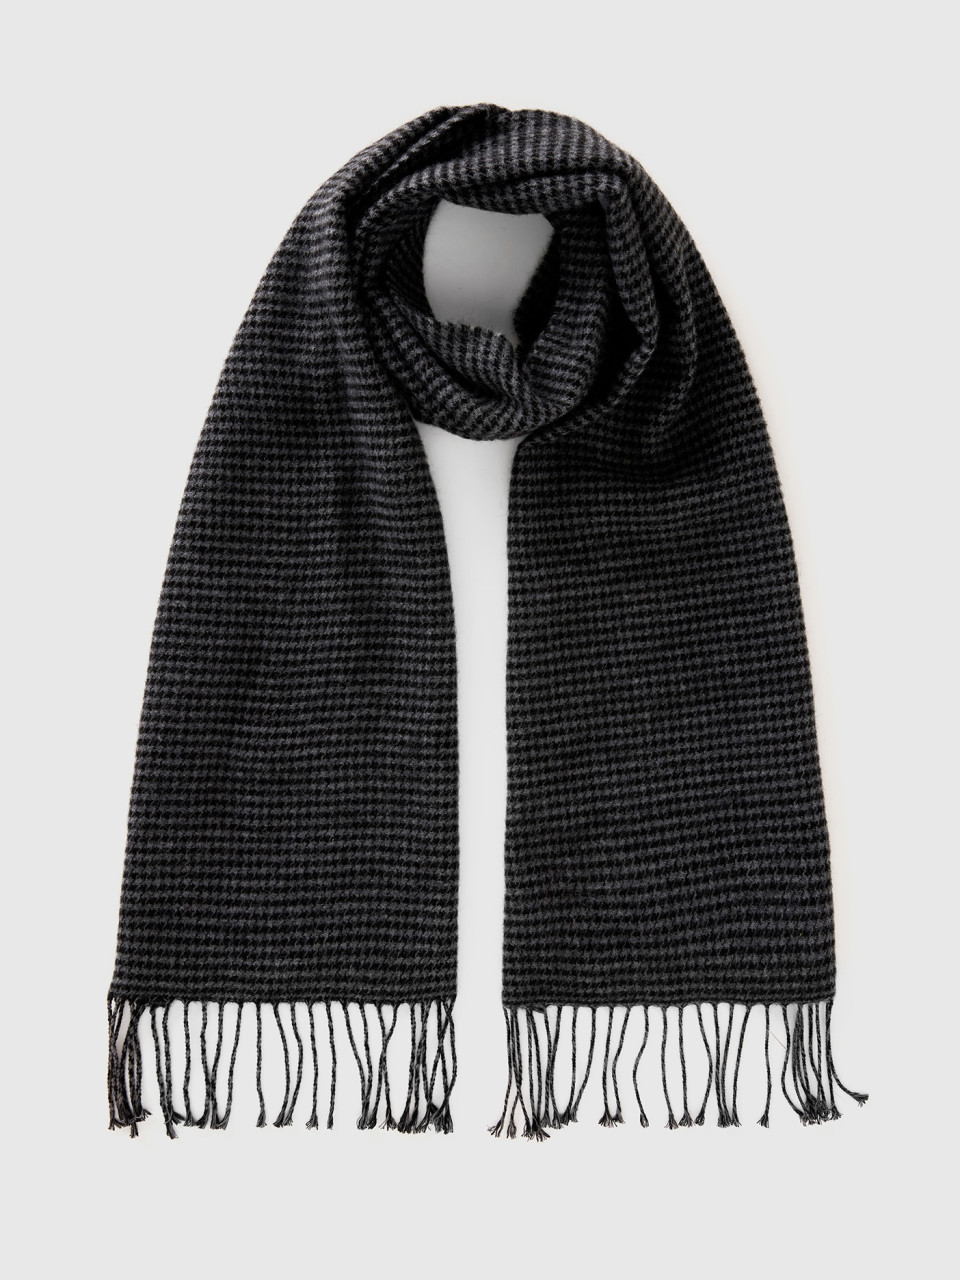 Benetton, Houndstooth Scarf In Recycled Cotton Blend, Black, Men